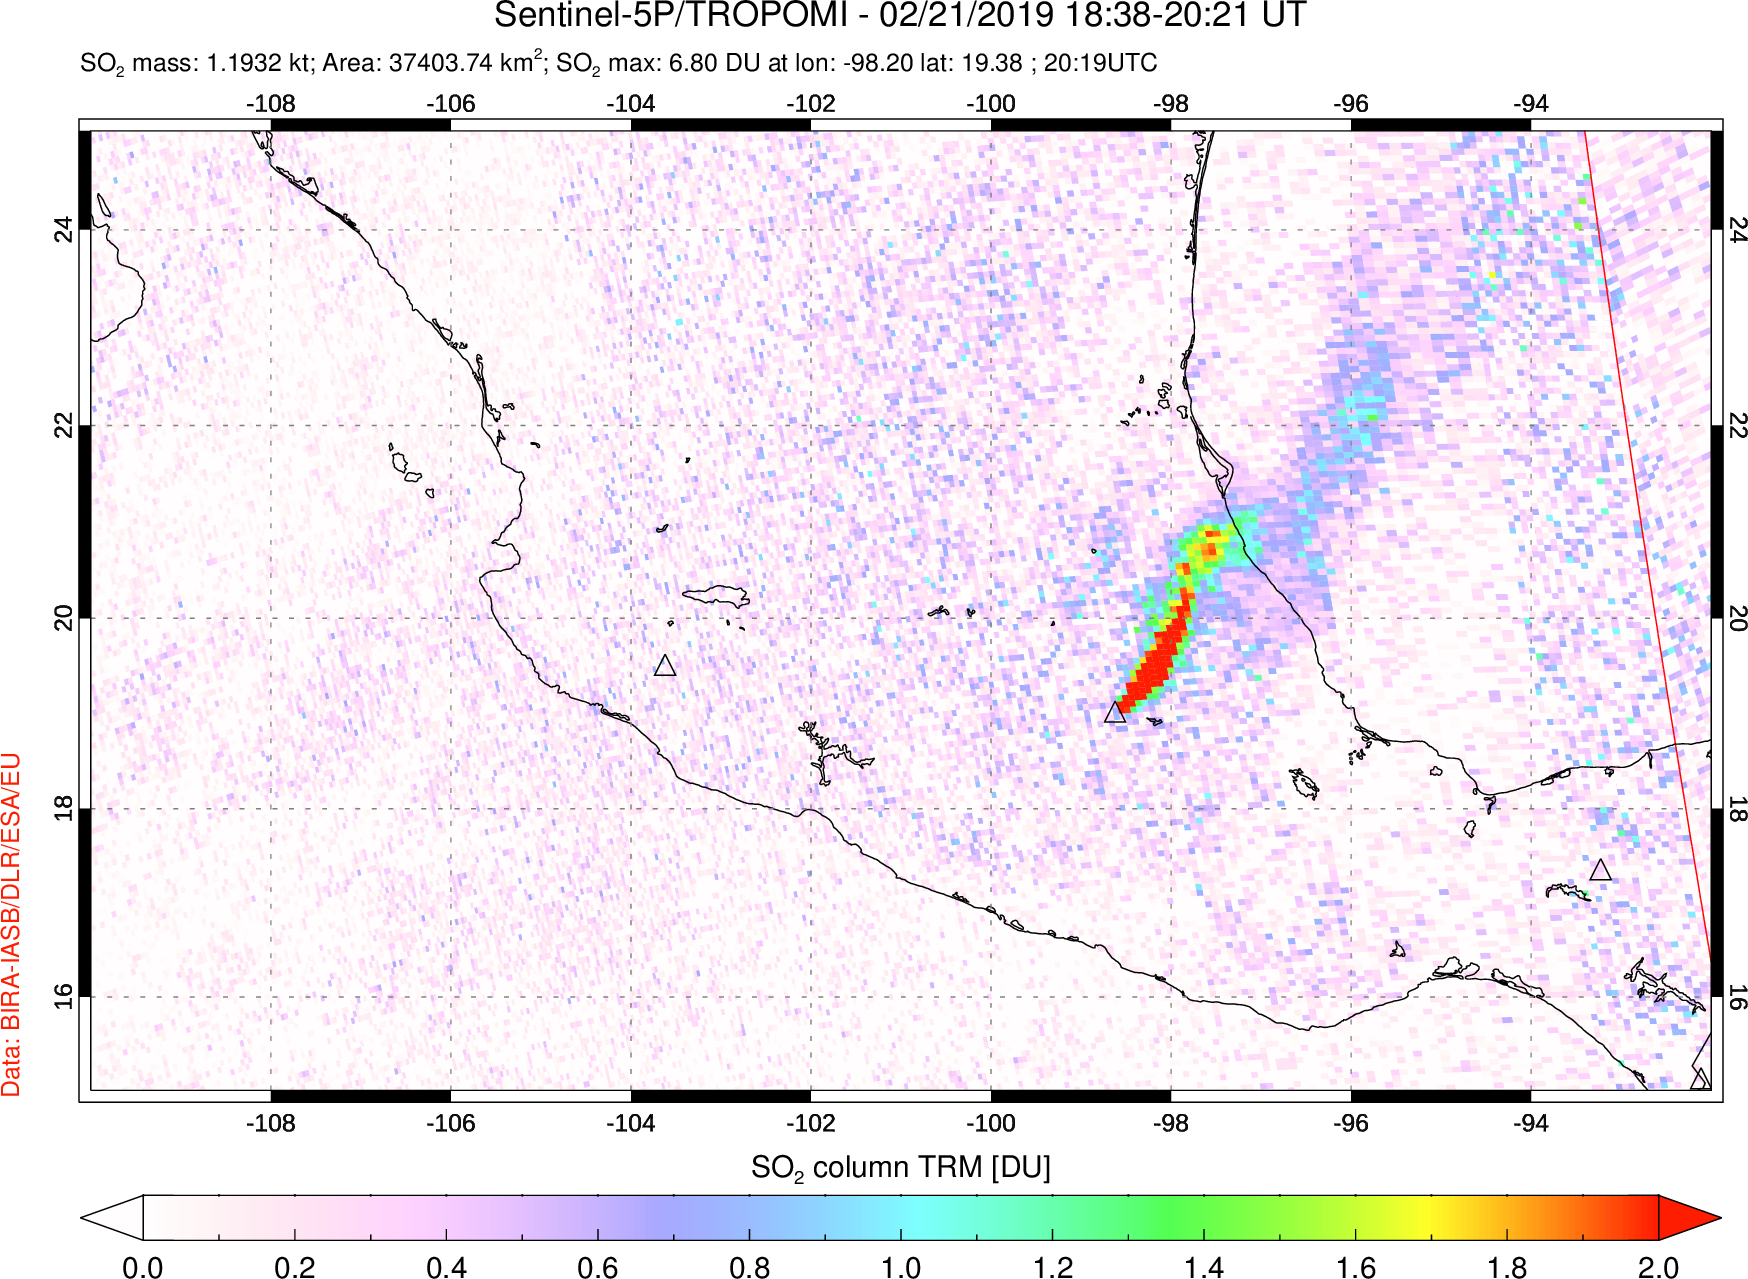 A sulfur dioxide image over Mexico on Feb 21, 2019.